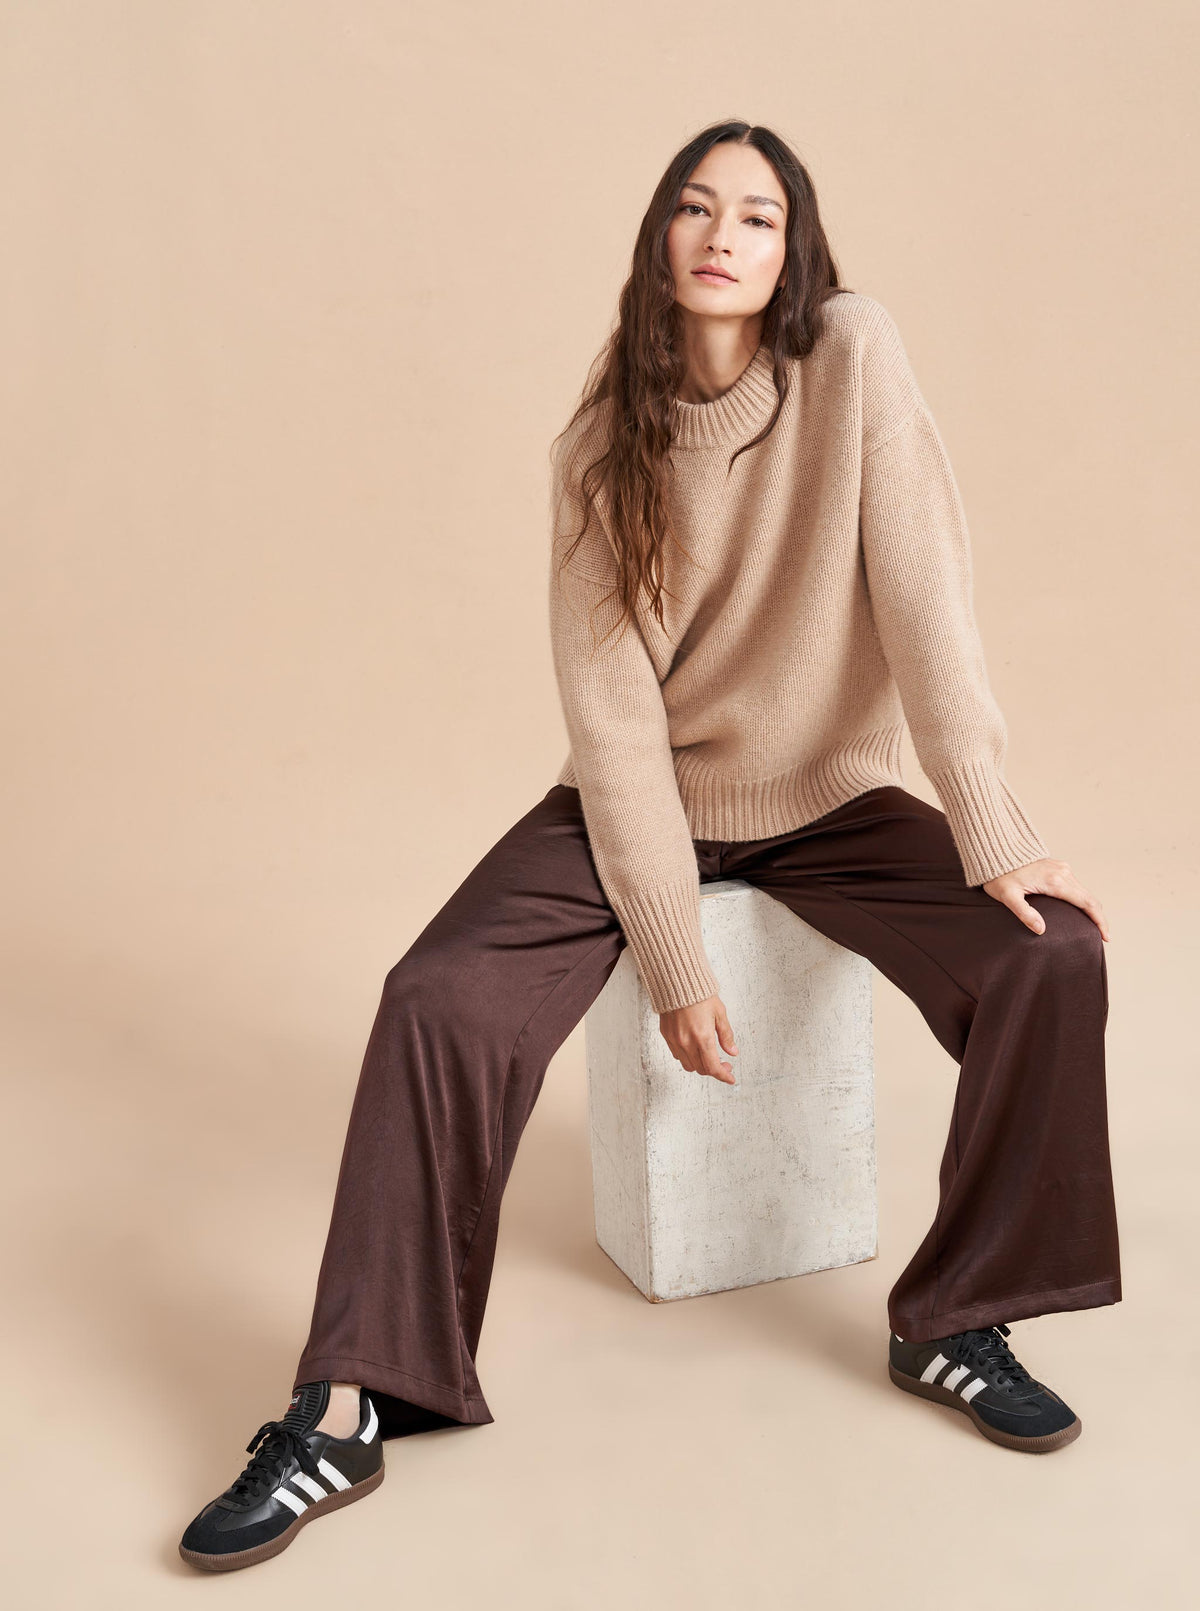 Our infamous Marin Sweater now in solid colors so get on board whether you are in the mood for all over stripes or not in our best-selling, 7-ply wool-cashmere sweater. Comfort and style, not mutually exclusive.